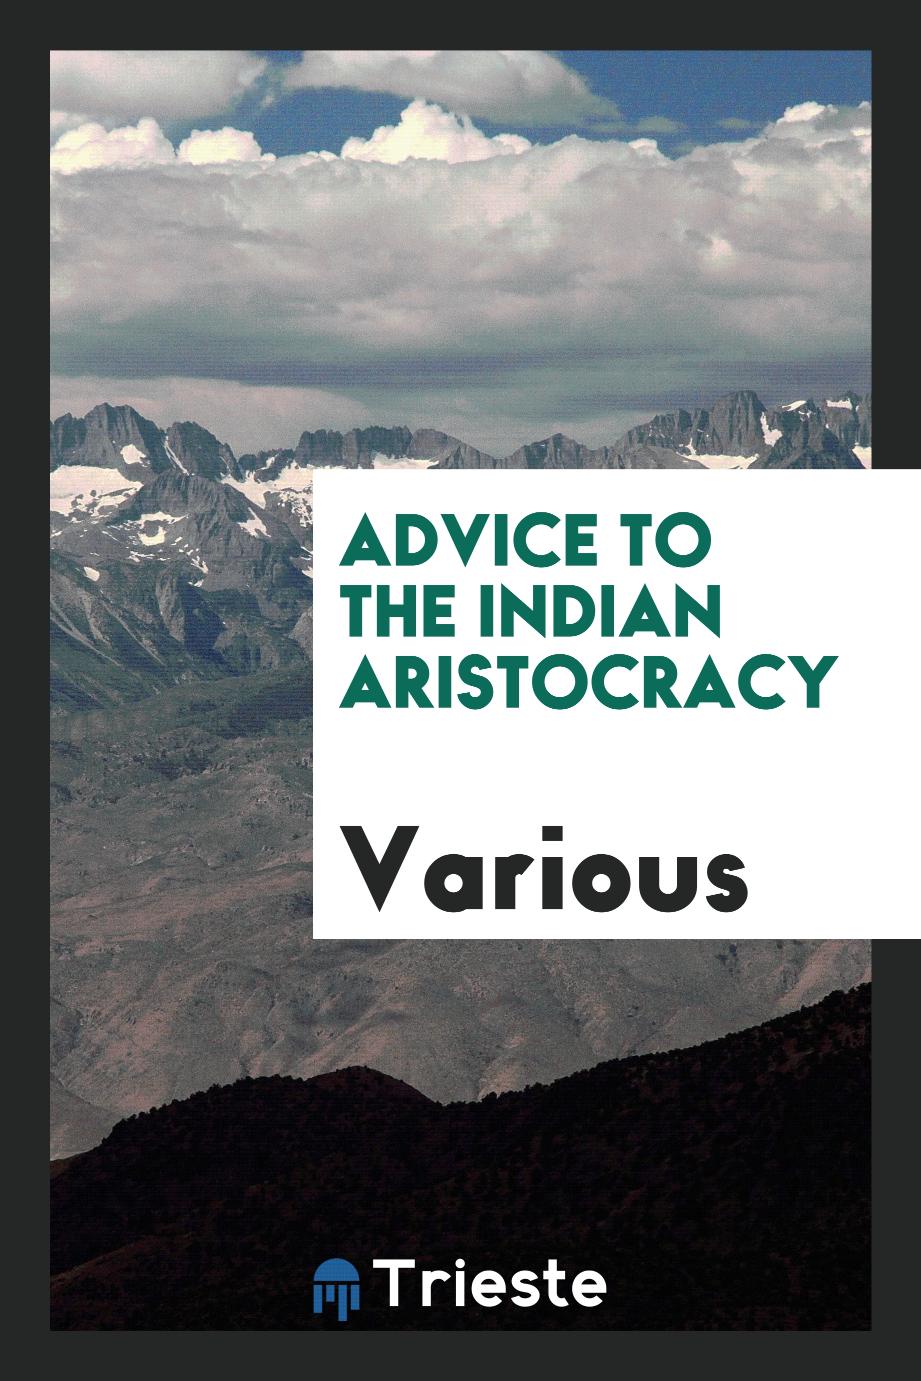 Advice to the Indian Aristocracy